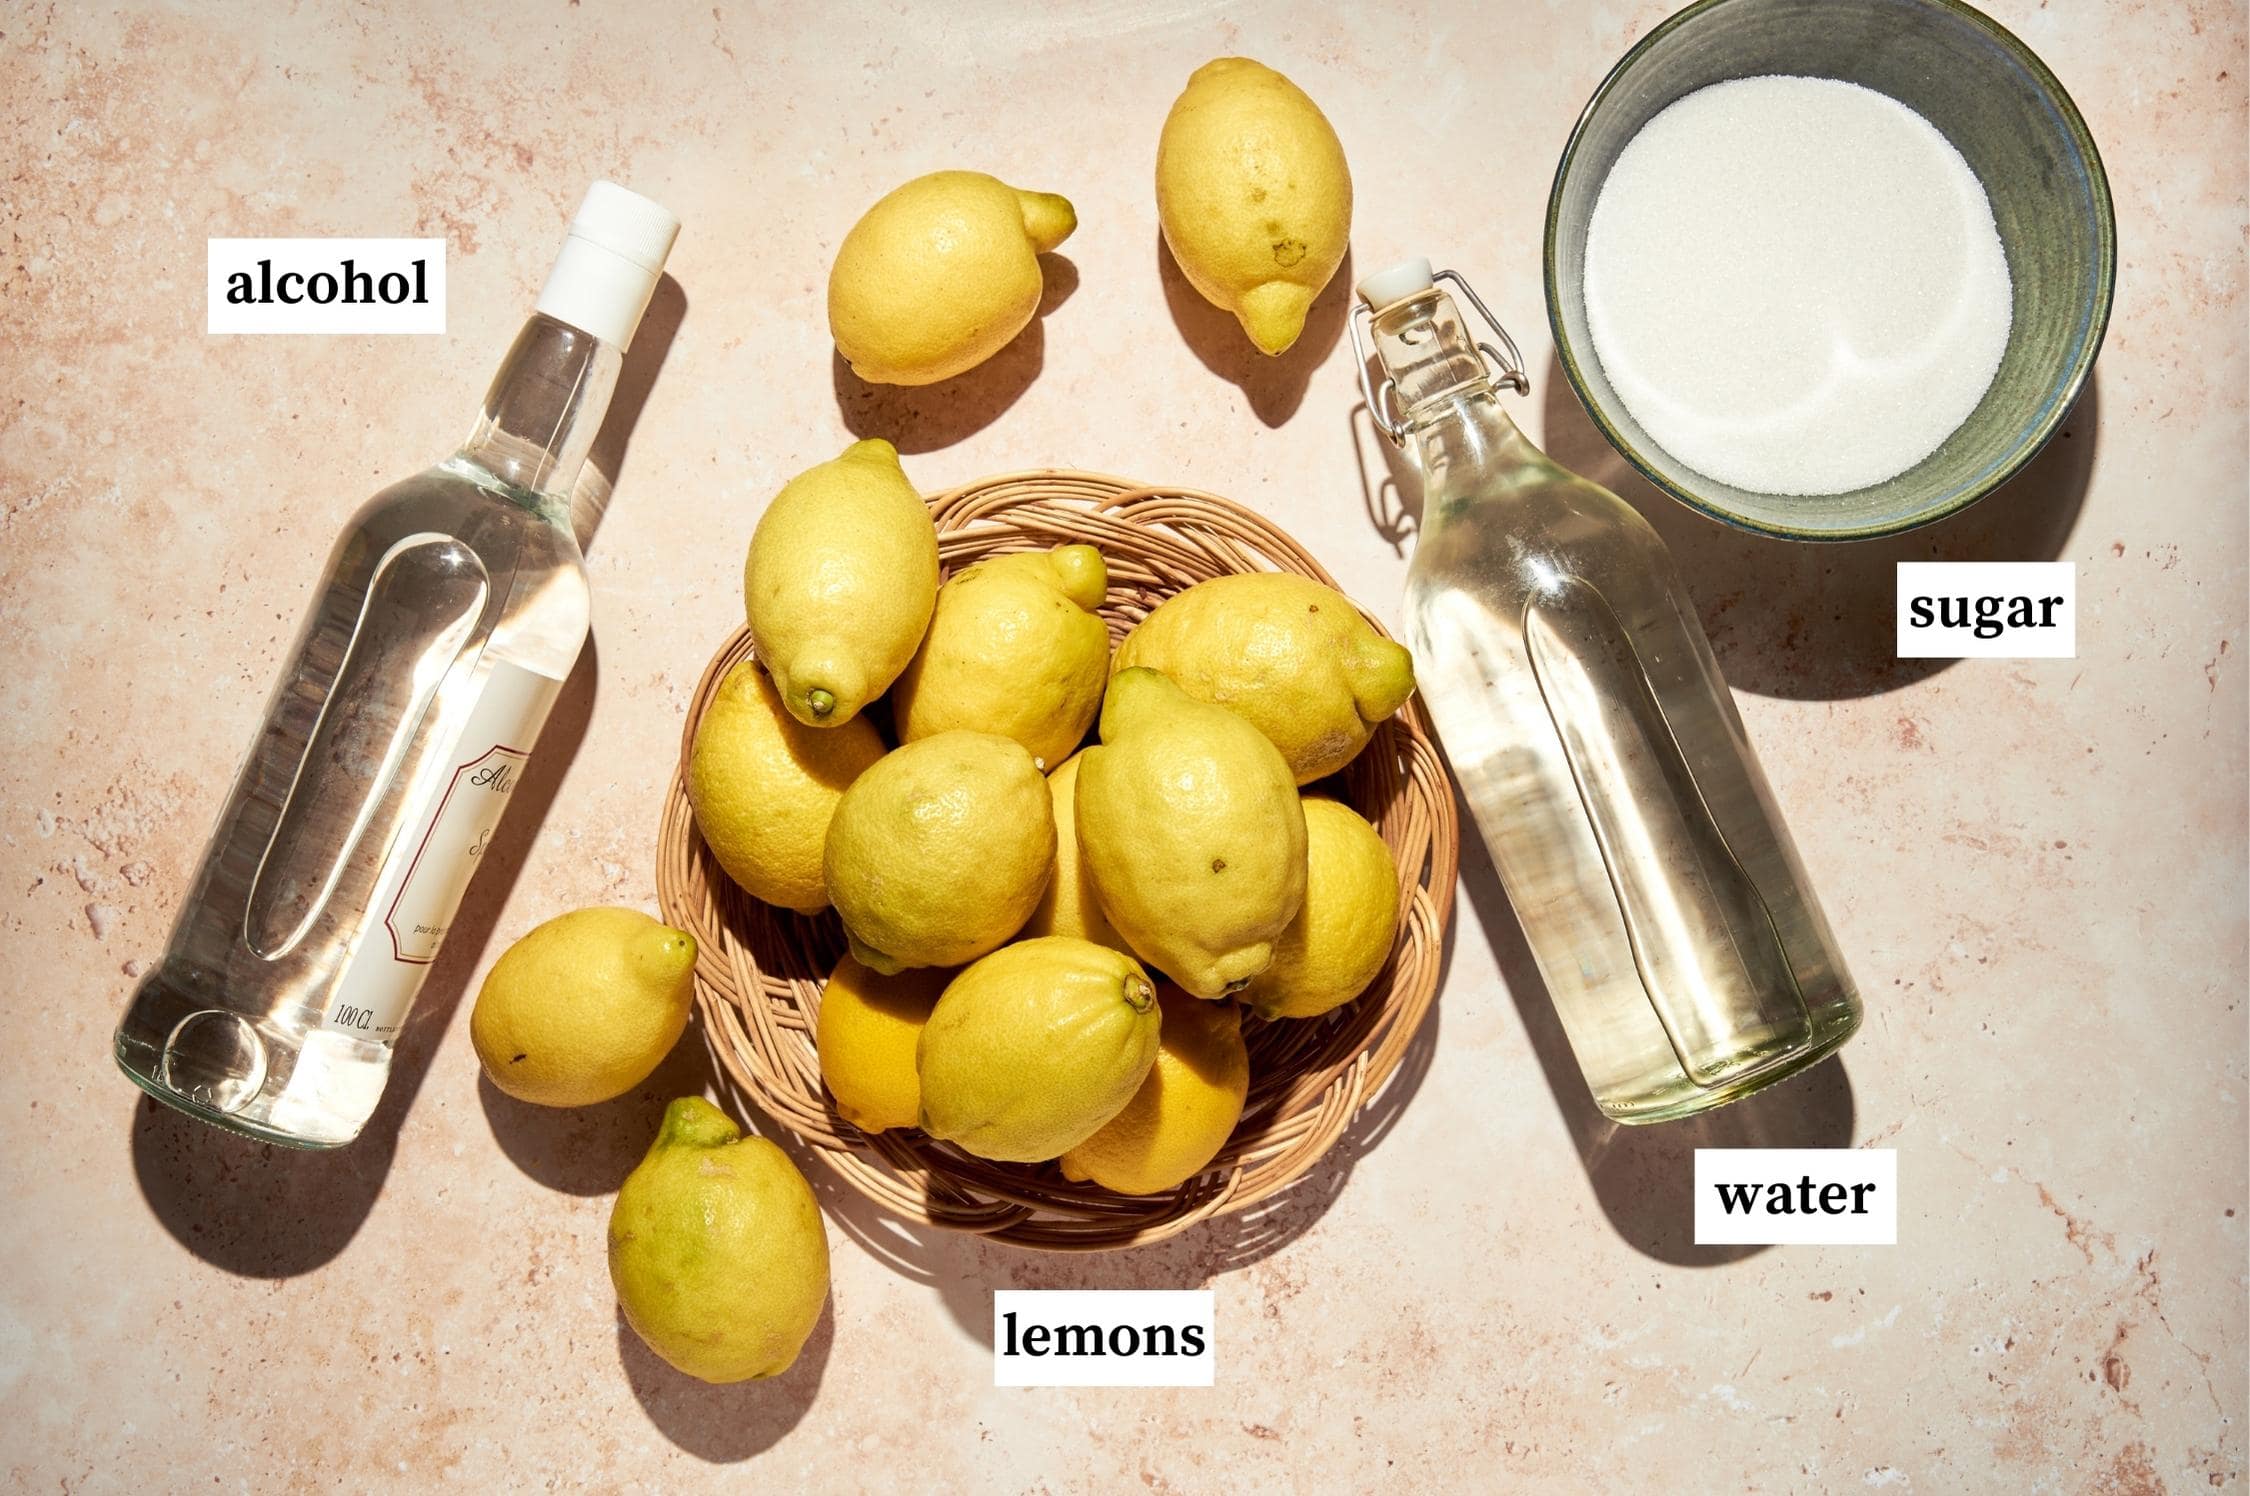 Ingredients for homemade limoncello: lemons, alcohol, sugar and water.